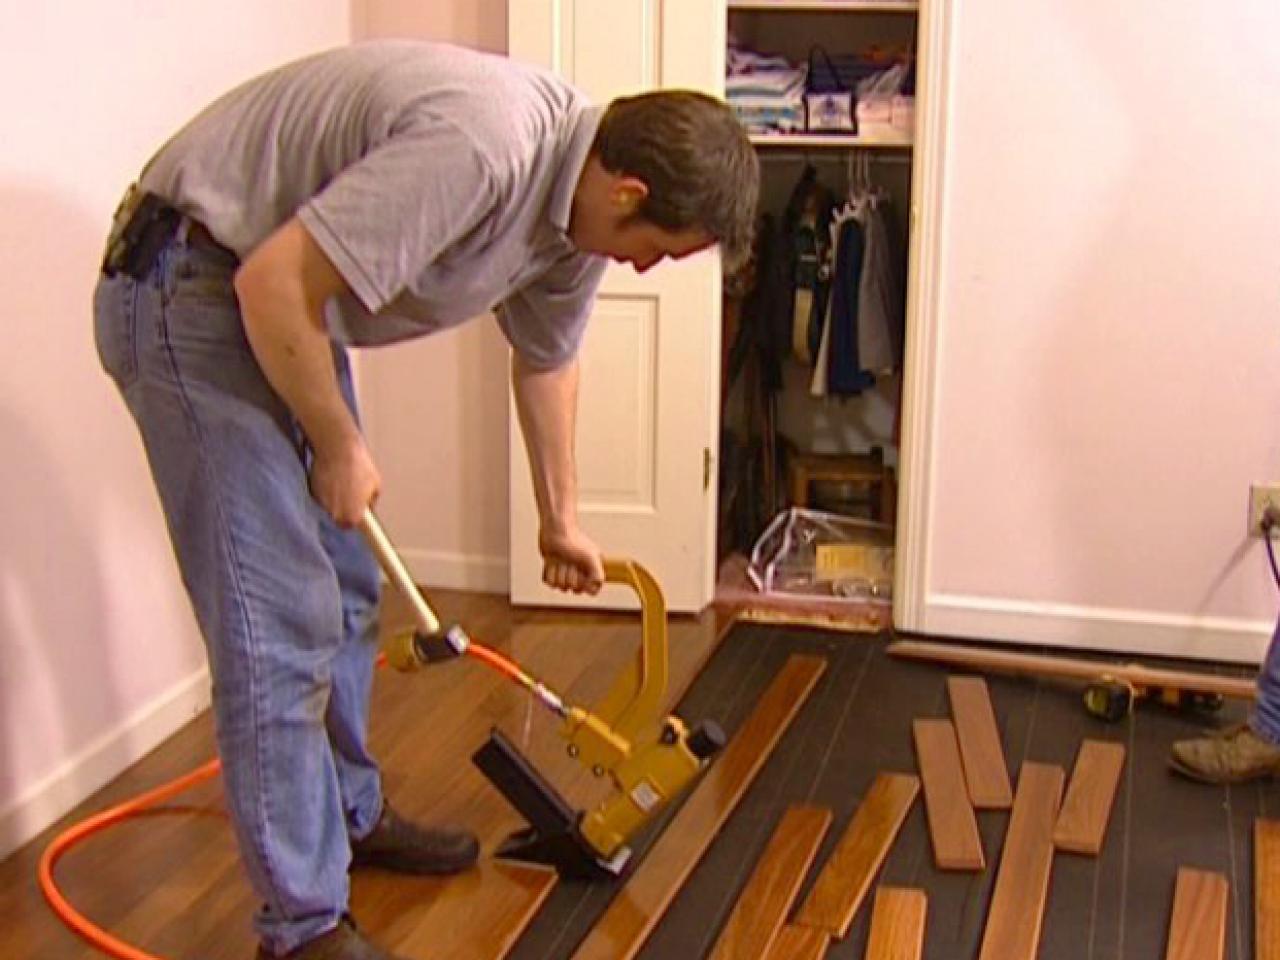 How To Install A Hardwood Floor, How To Nail Down 3 4 Hardwood Flooring